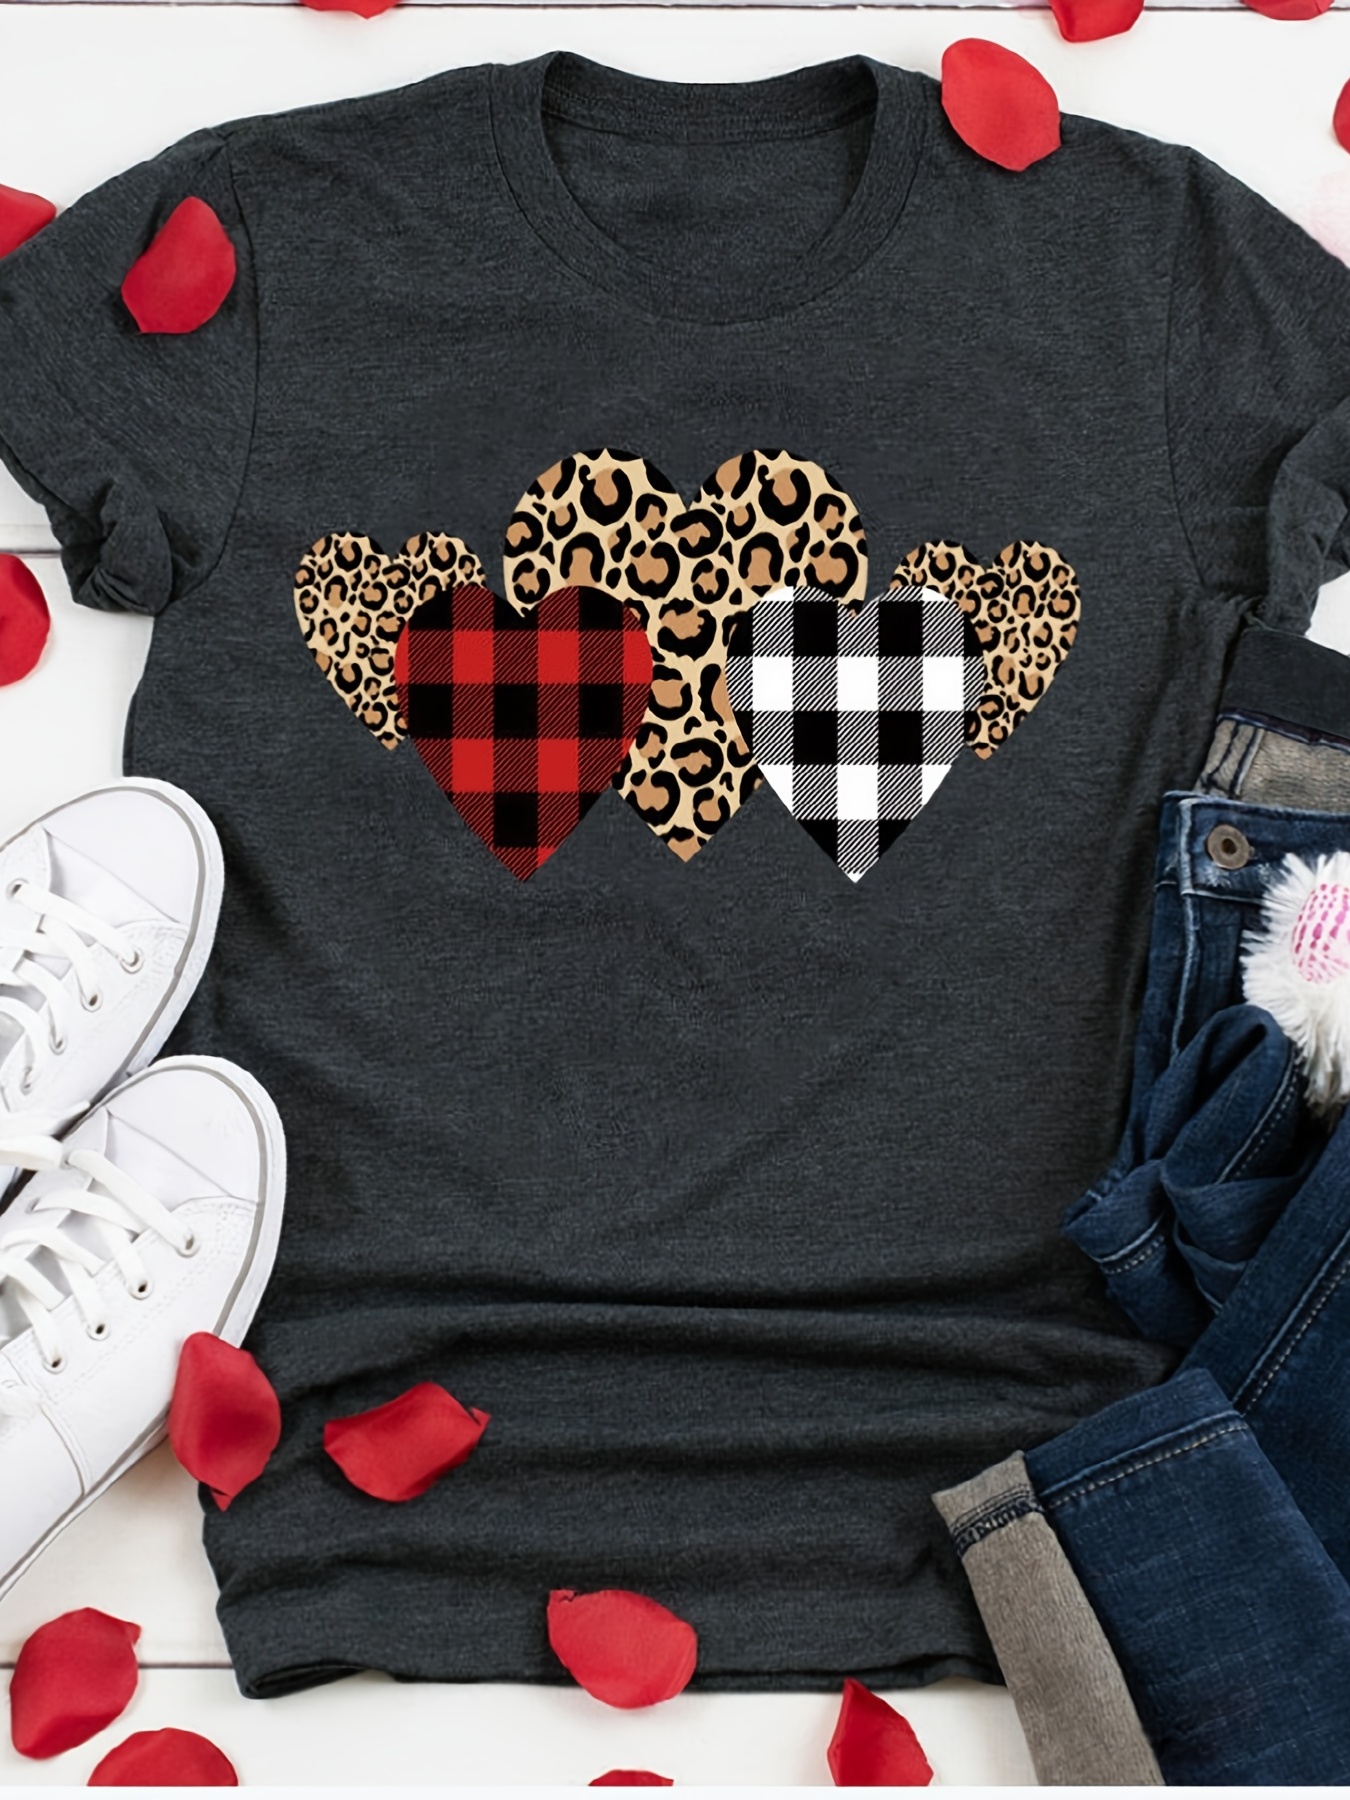 Fanxing Heart Tops for Women Valentines Tshirt Girls Valentines Gifts Valentine's Day Shirts Cute Valentine Cards for School Tees T-shirts Tops